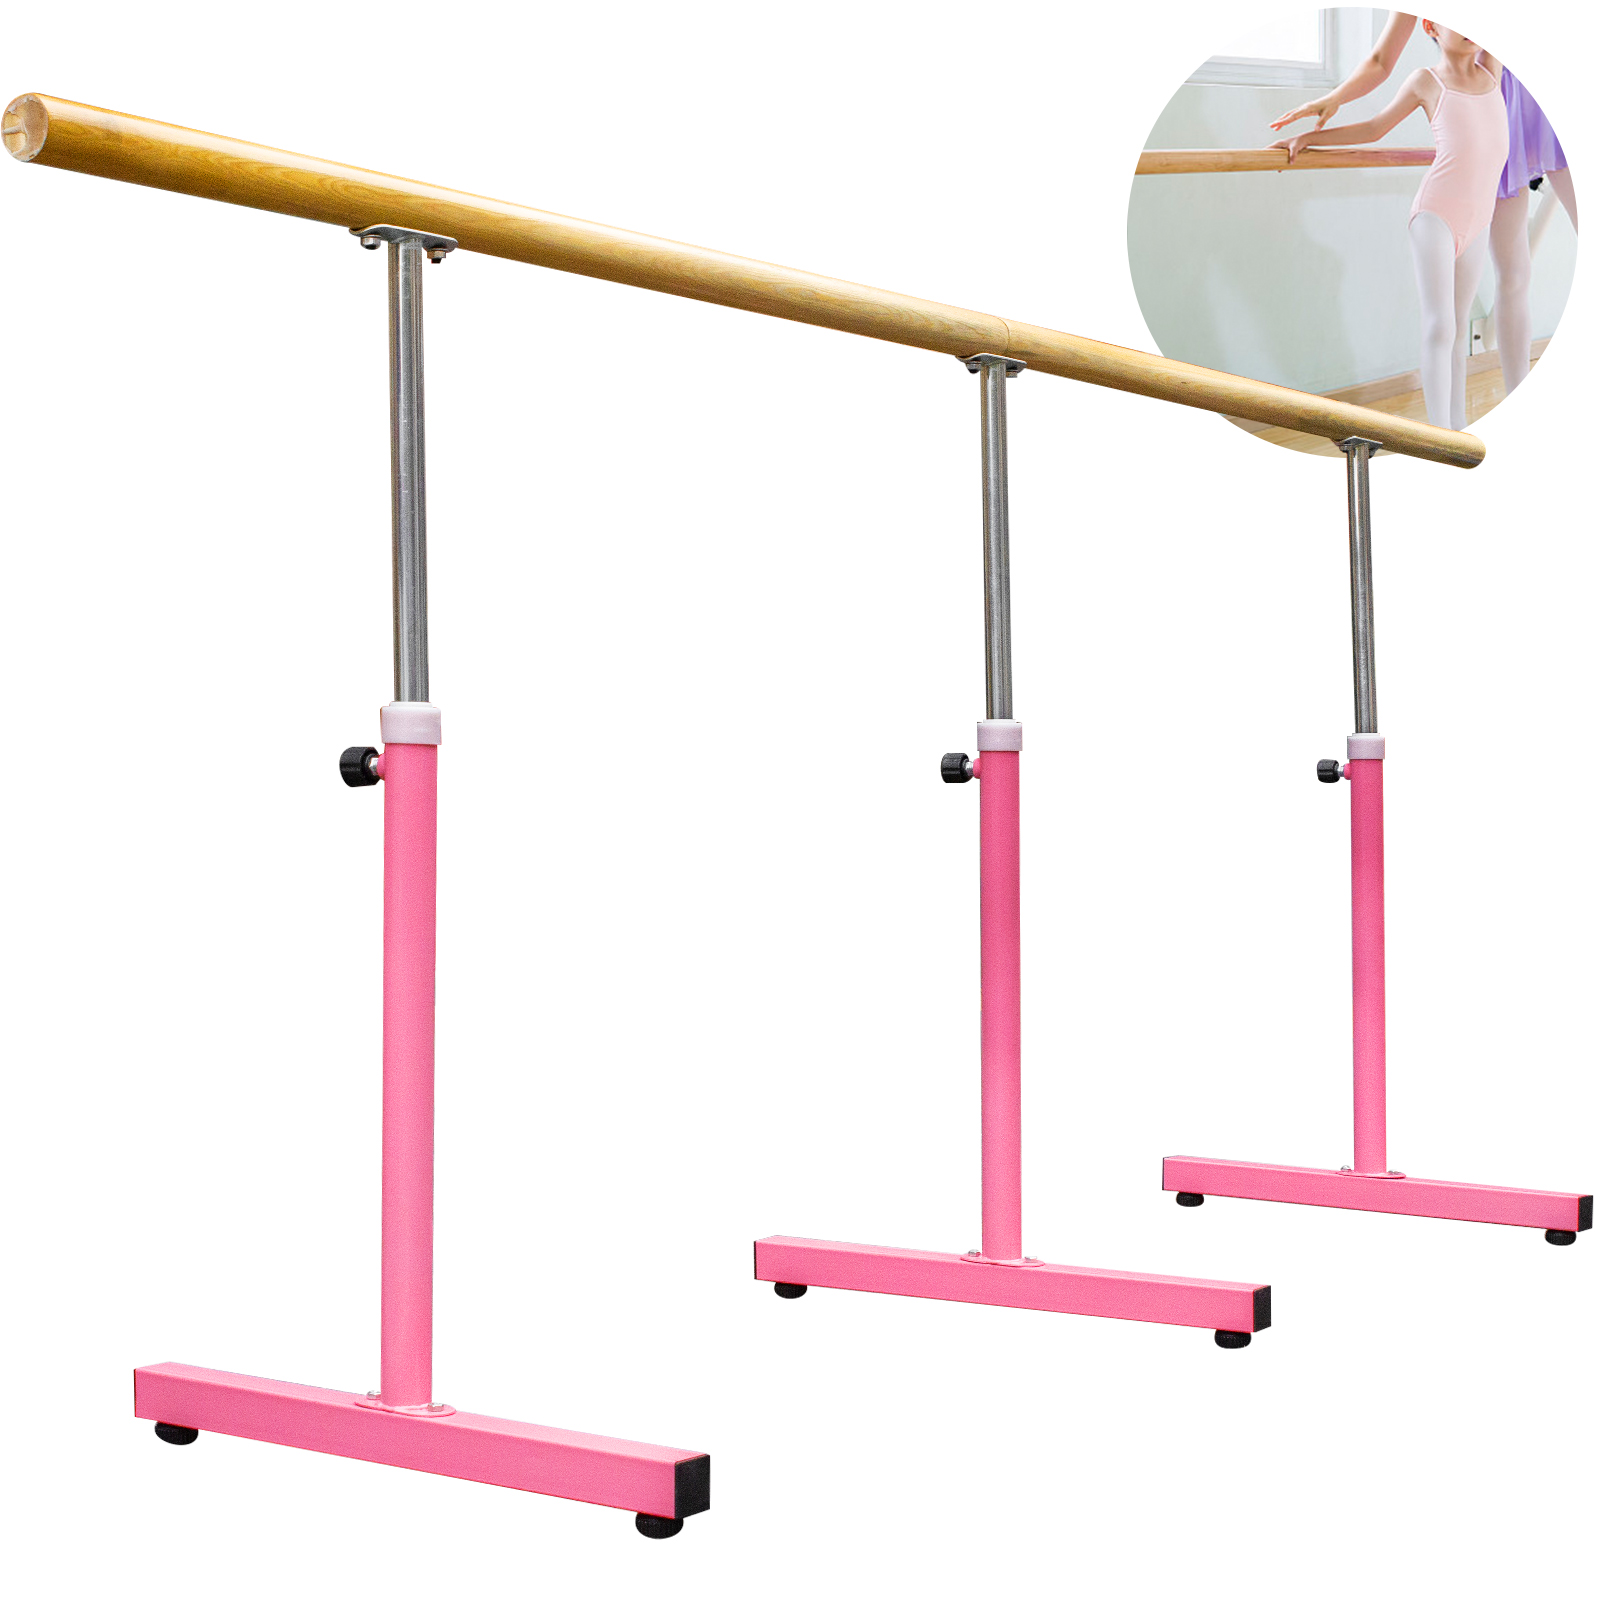 What is Wooden Gym Bar Ballet Bar Gymnastic Equipment Portable Ballerina  Bar Double Ballet Stretch Barre for Home